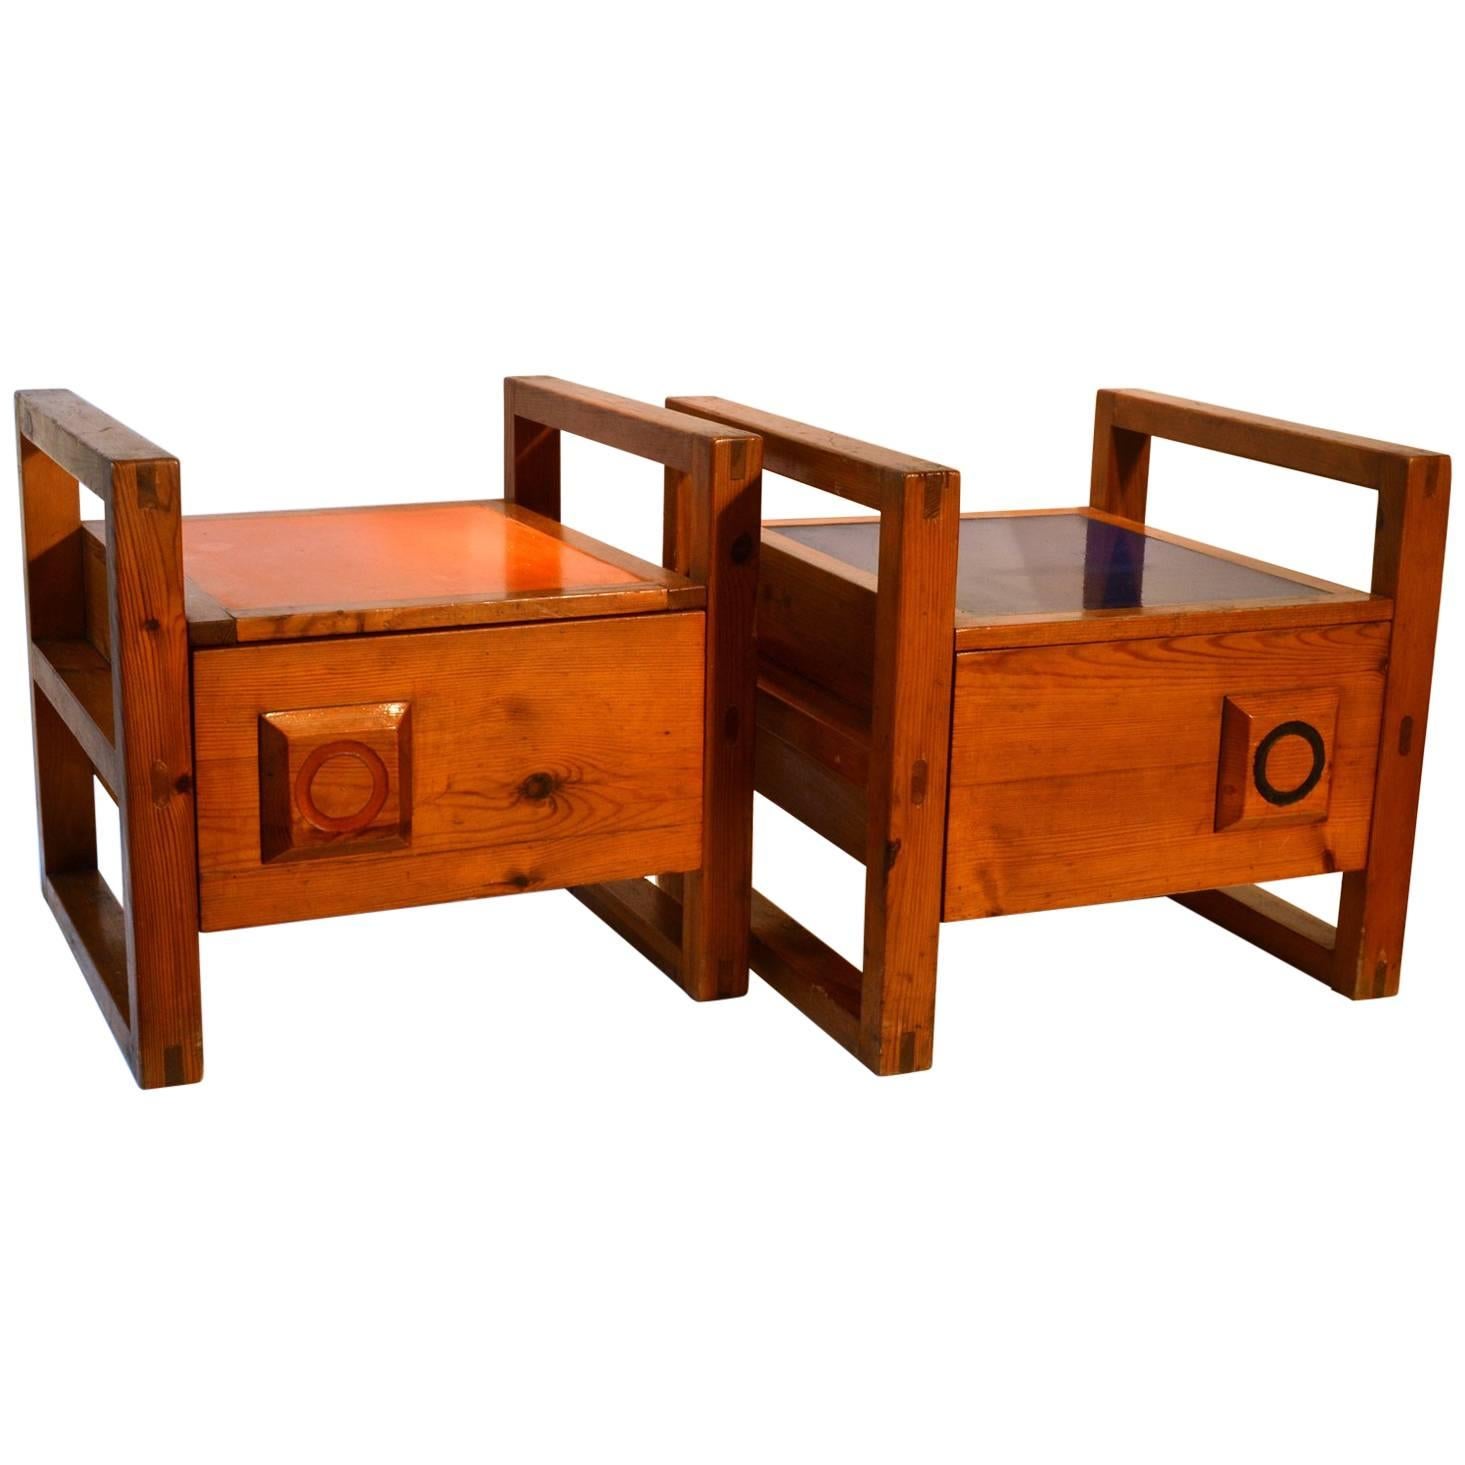 Pair of 1950s Modernist French Bed-side Tables with Orange and Blue Tops